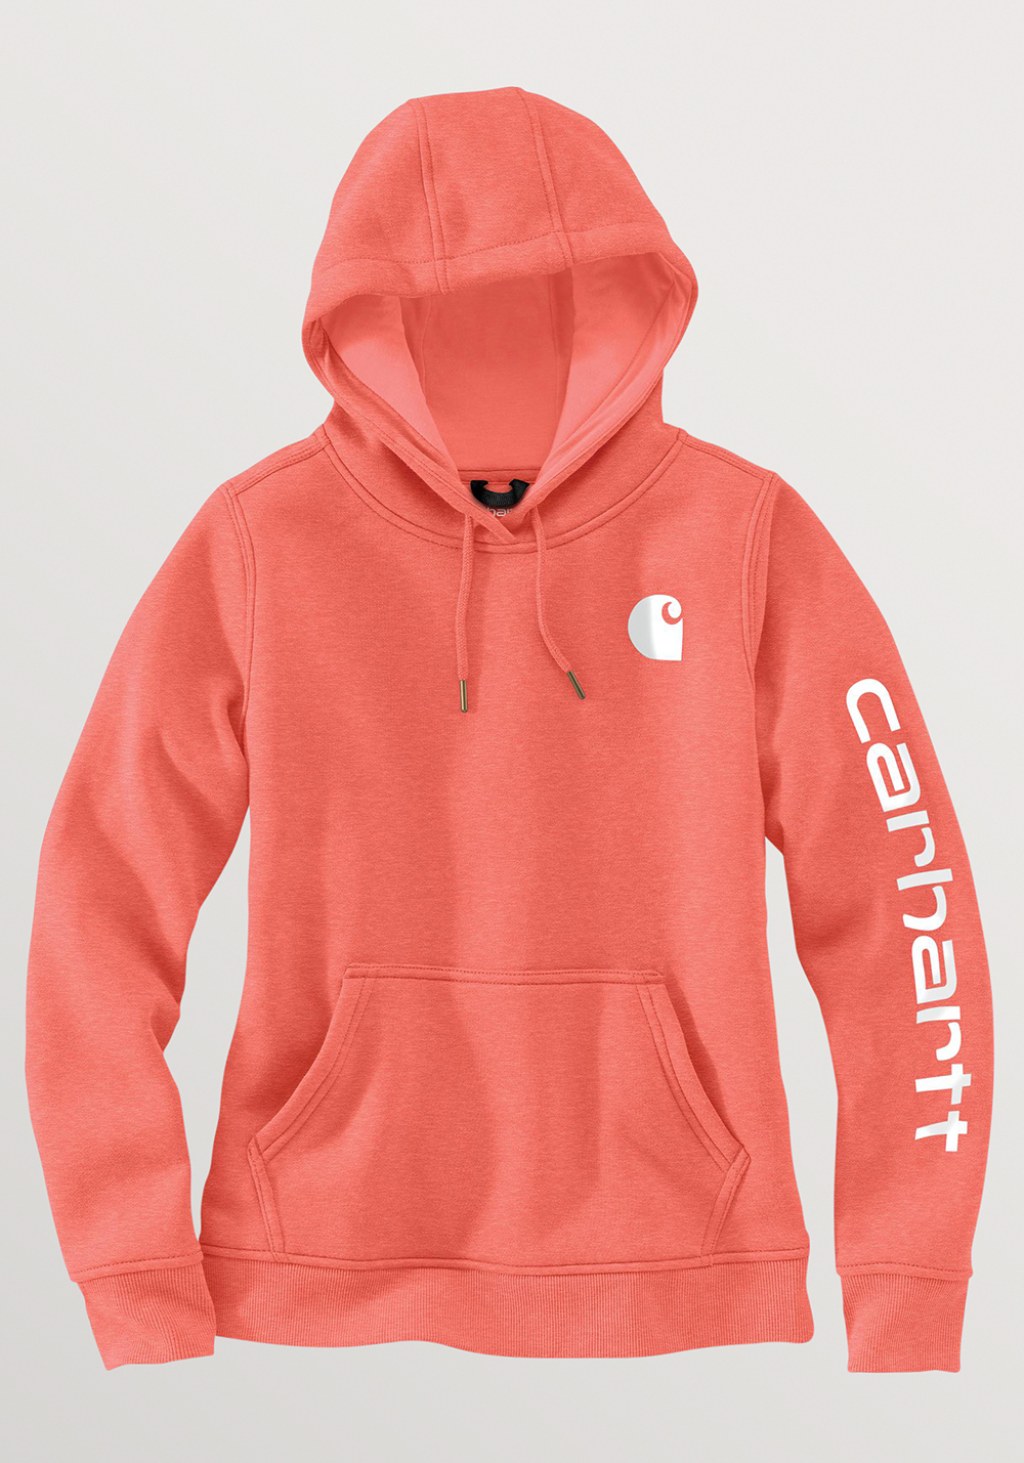 Picture of: Womens Carhartt Midweight Logo Graphic Hoodie Electric Coral